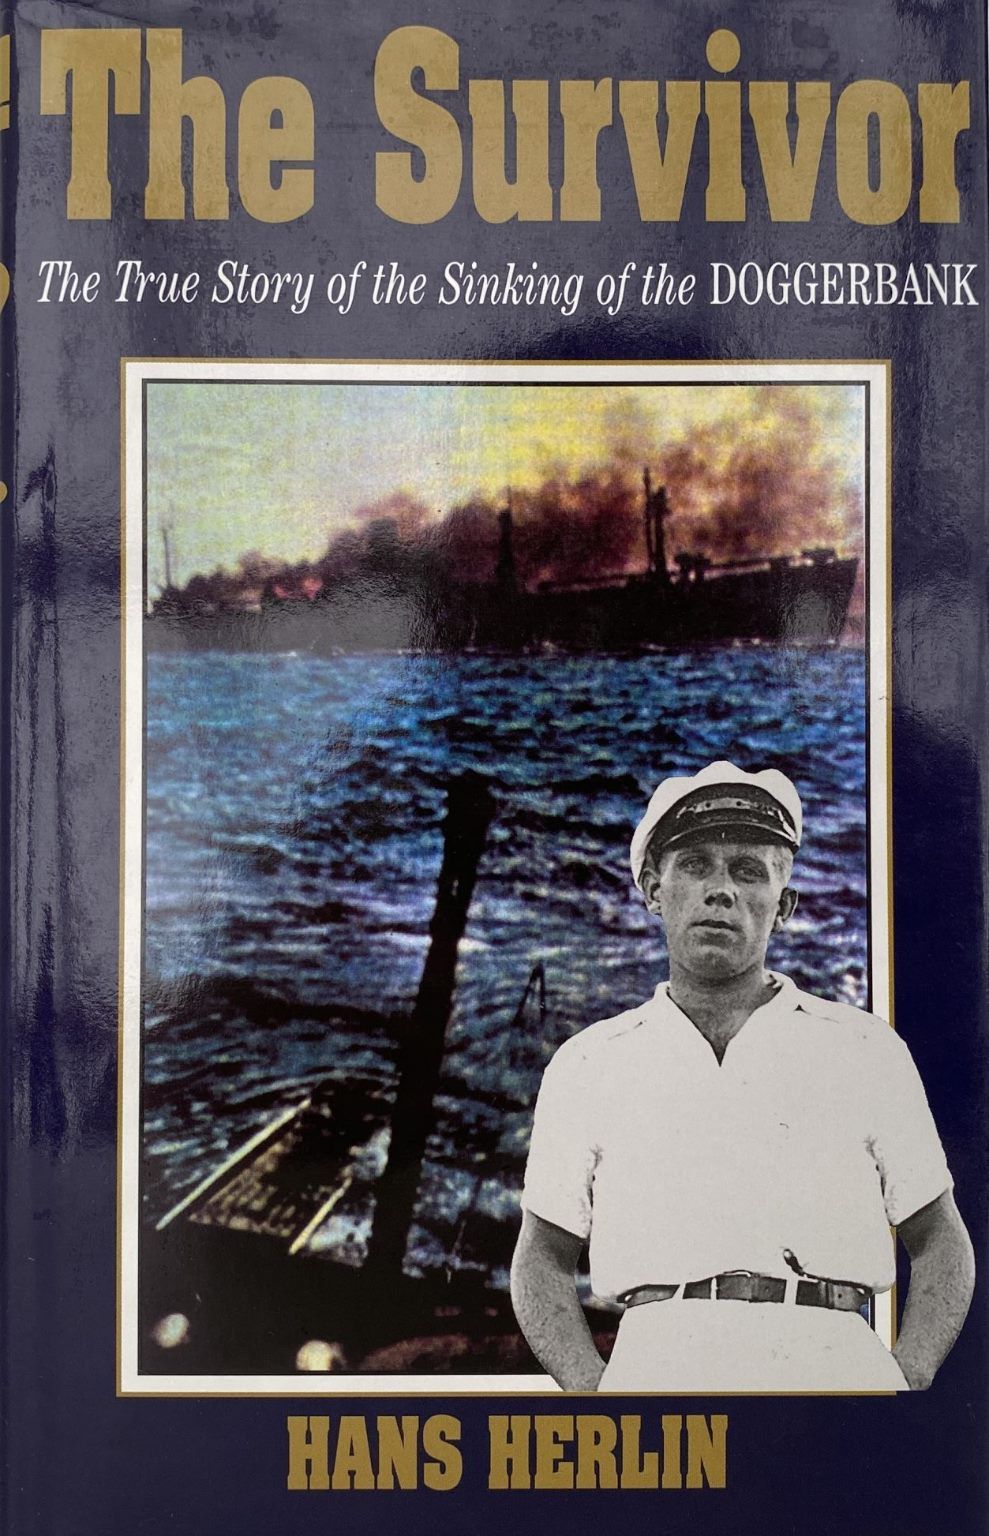 THE SURVIVOR: The True Story of the Sinking of the Doggerbank